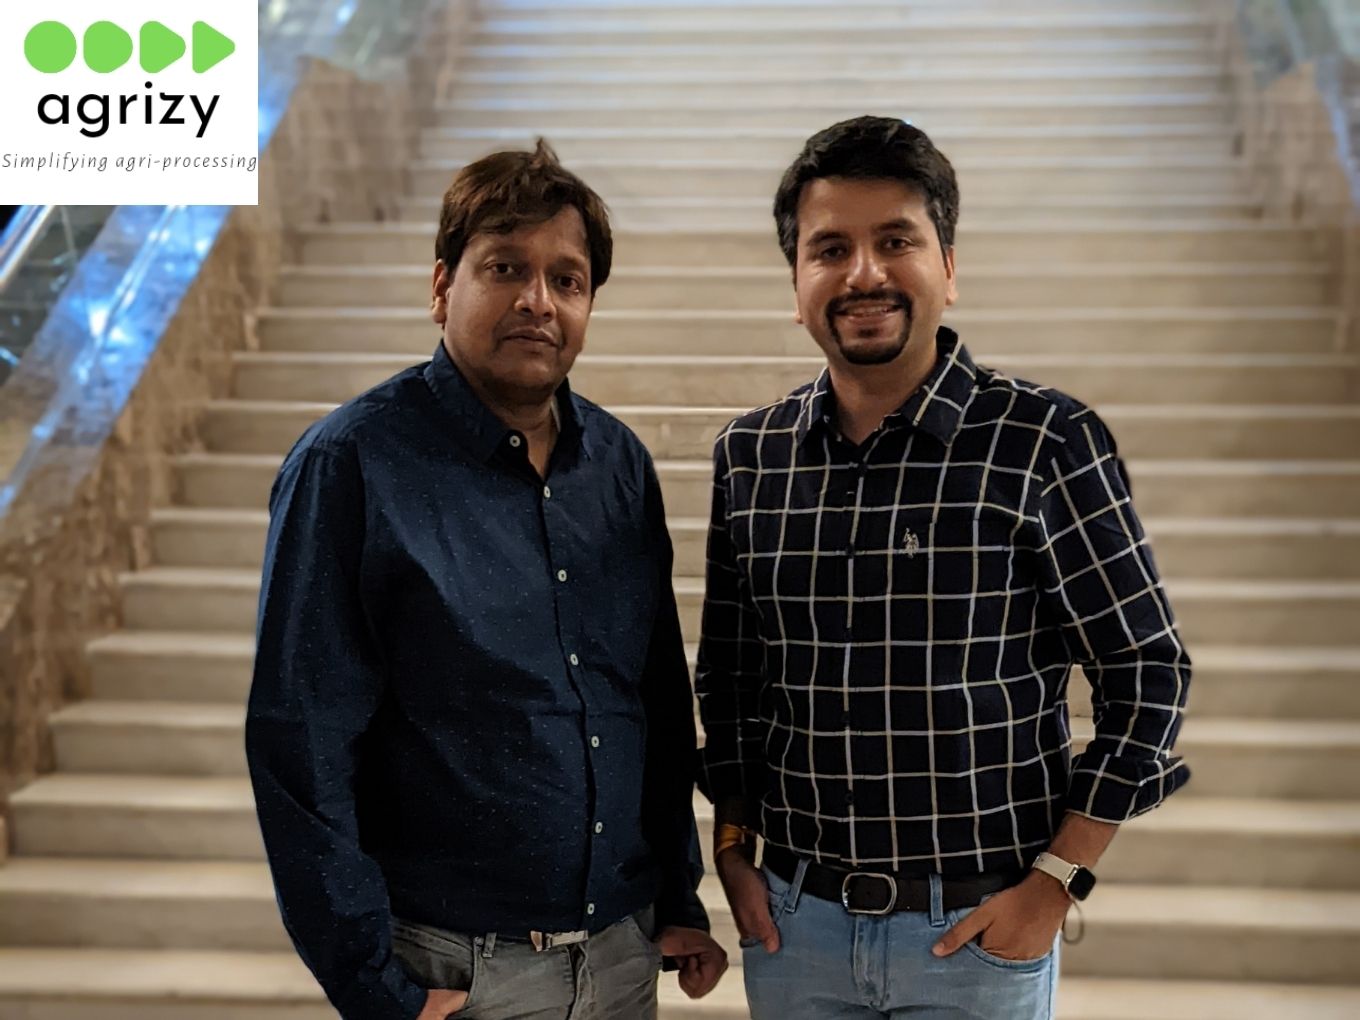 Agritech Startup Agrizy raises $4 Mn in seed funding